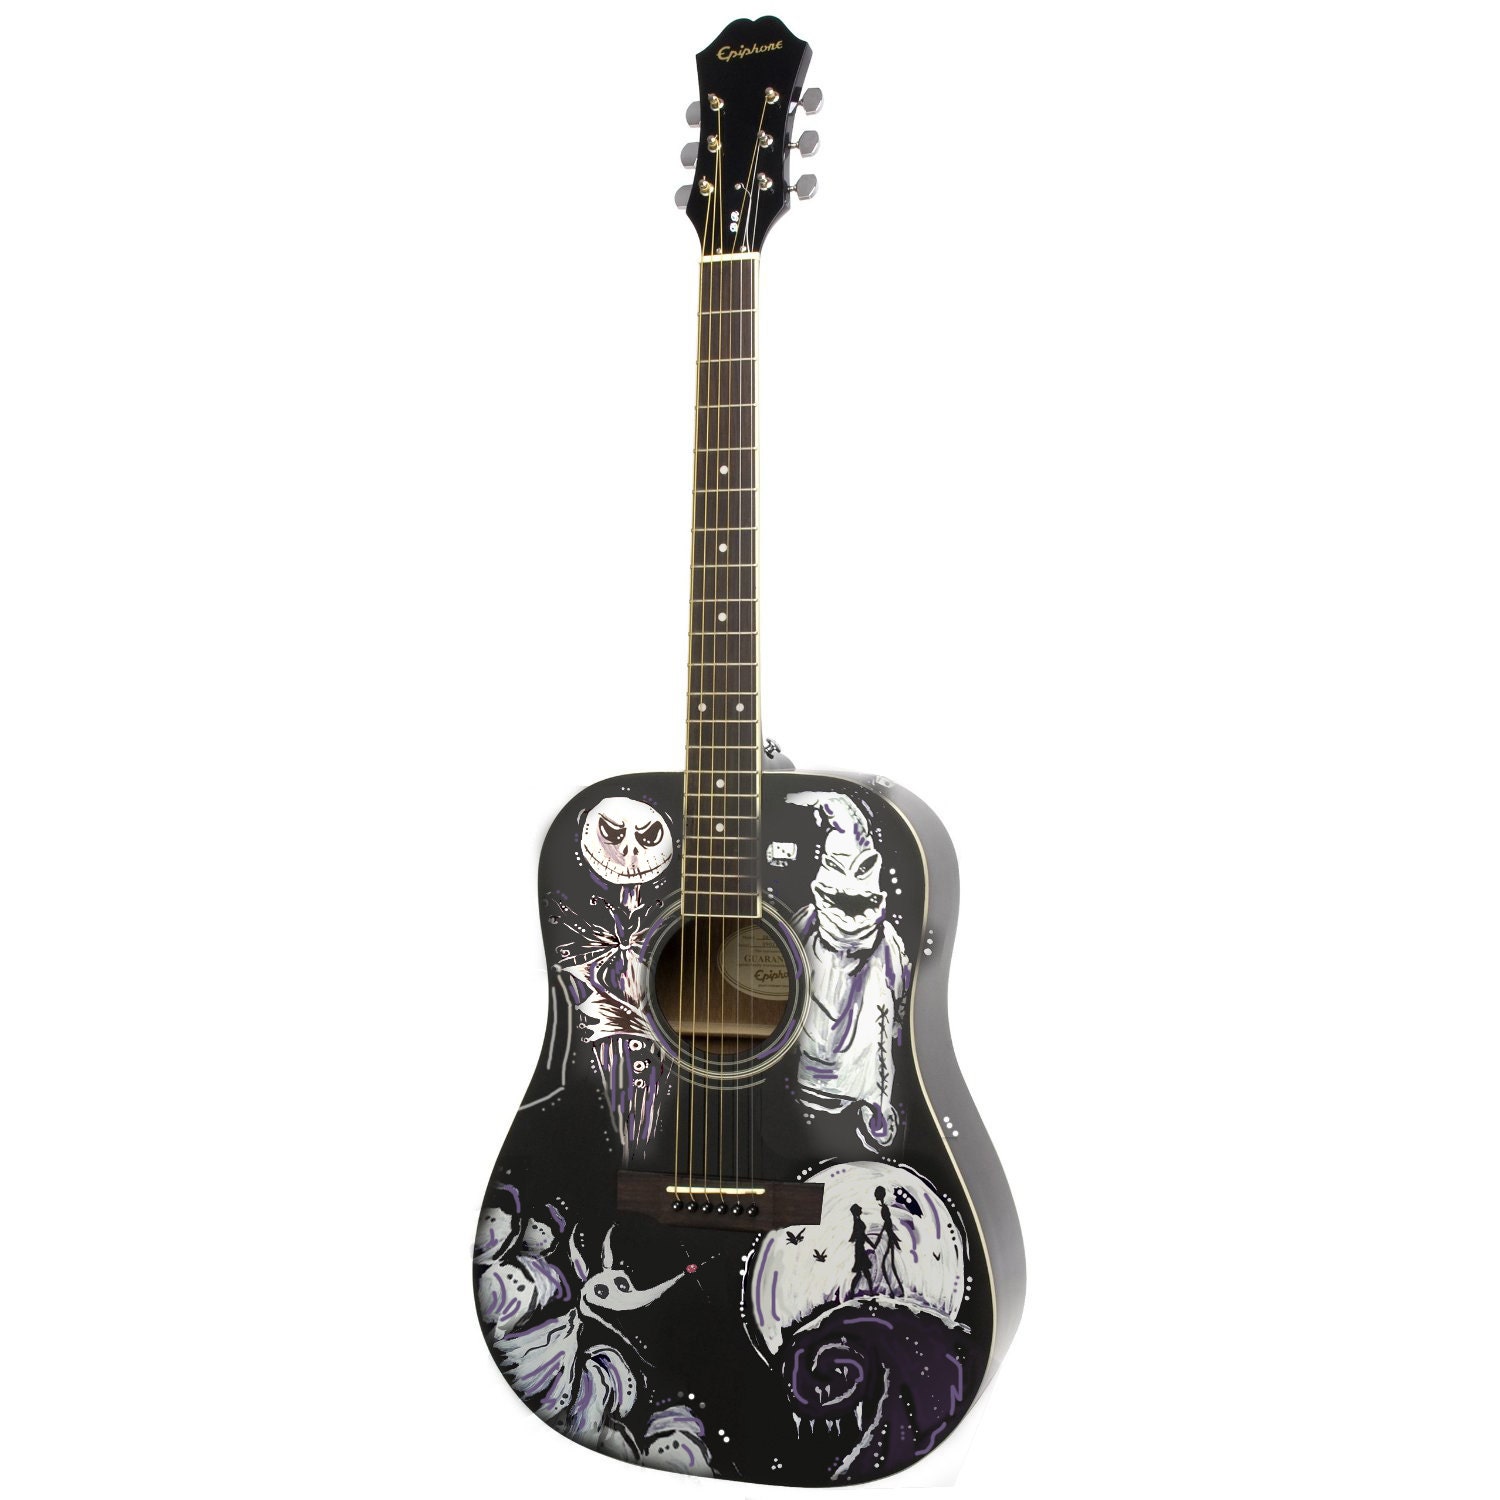 Nightmare Before Christmas Inspired Guitar by ChildatHeartPainter